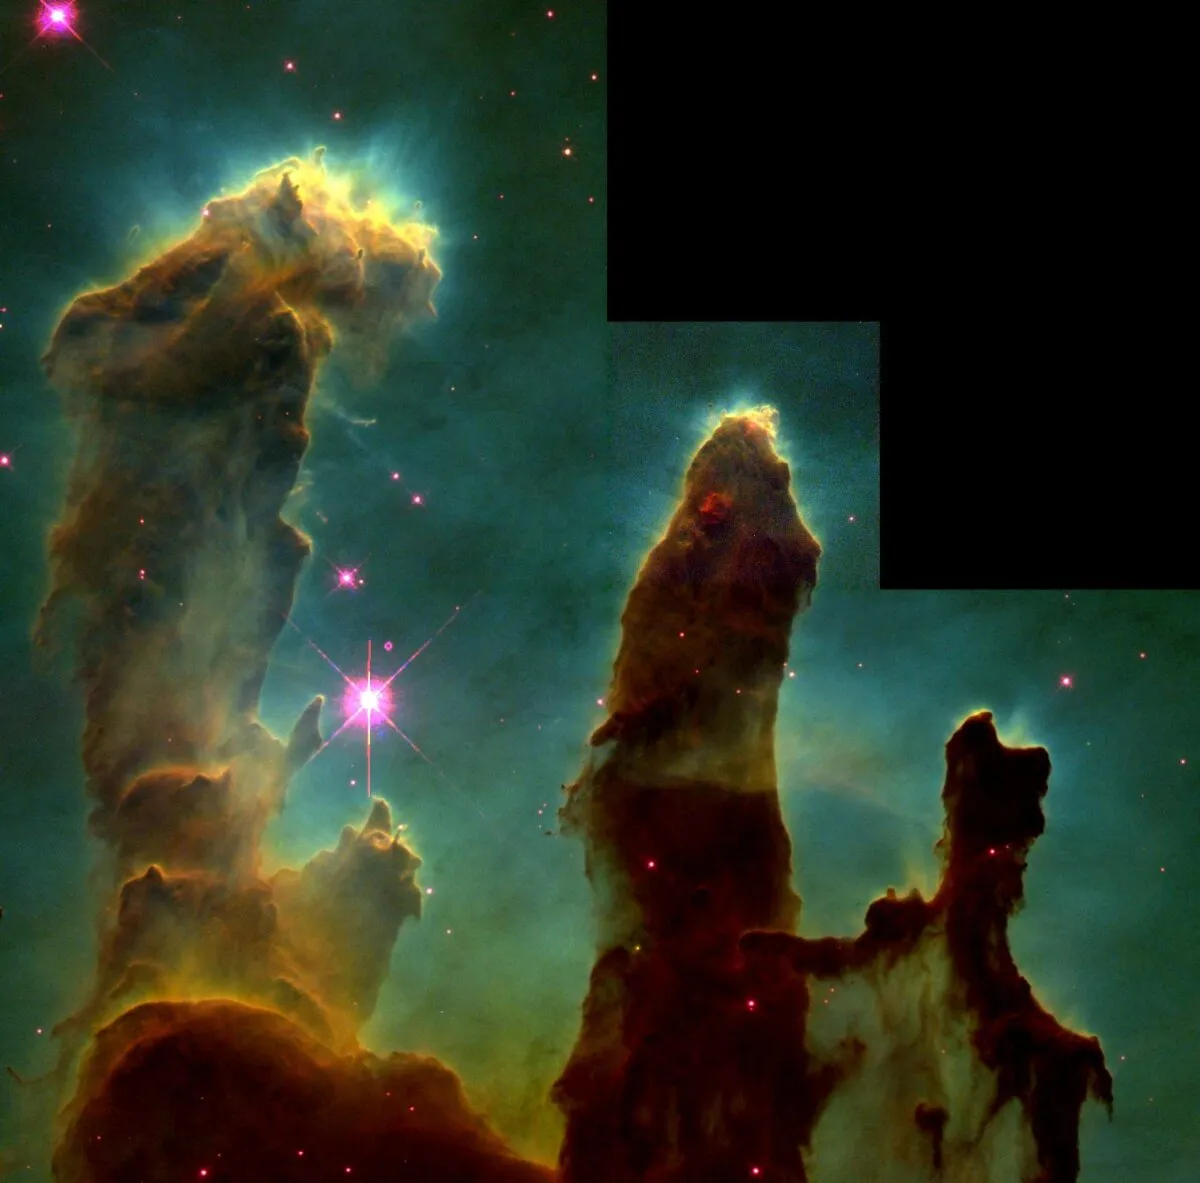 Hubble's famous 1995 image the 'Pillars of Creation'. Create your own astrophotography images in Hubble Palette by following the steps below. Credit: NASA, ESA, STScI, J. Hester and P. Scowen (Arizona State University)